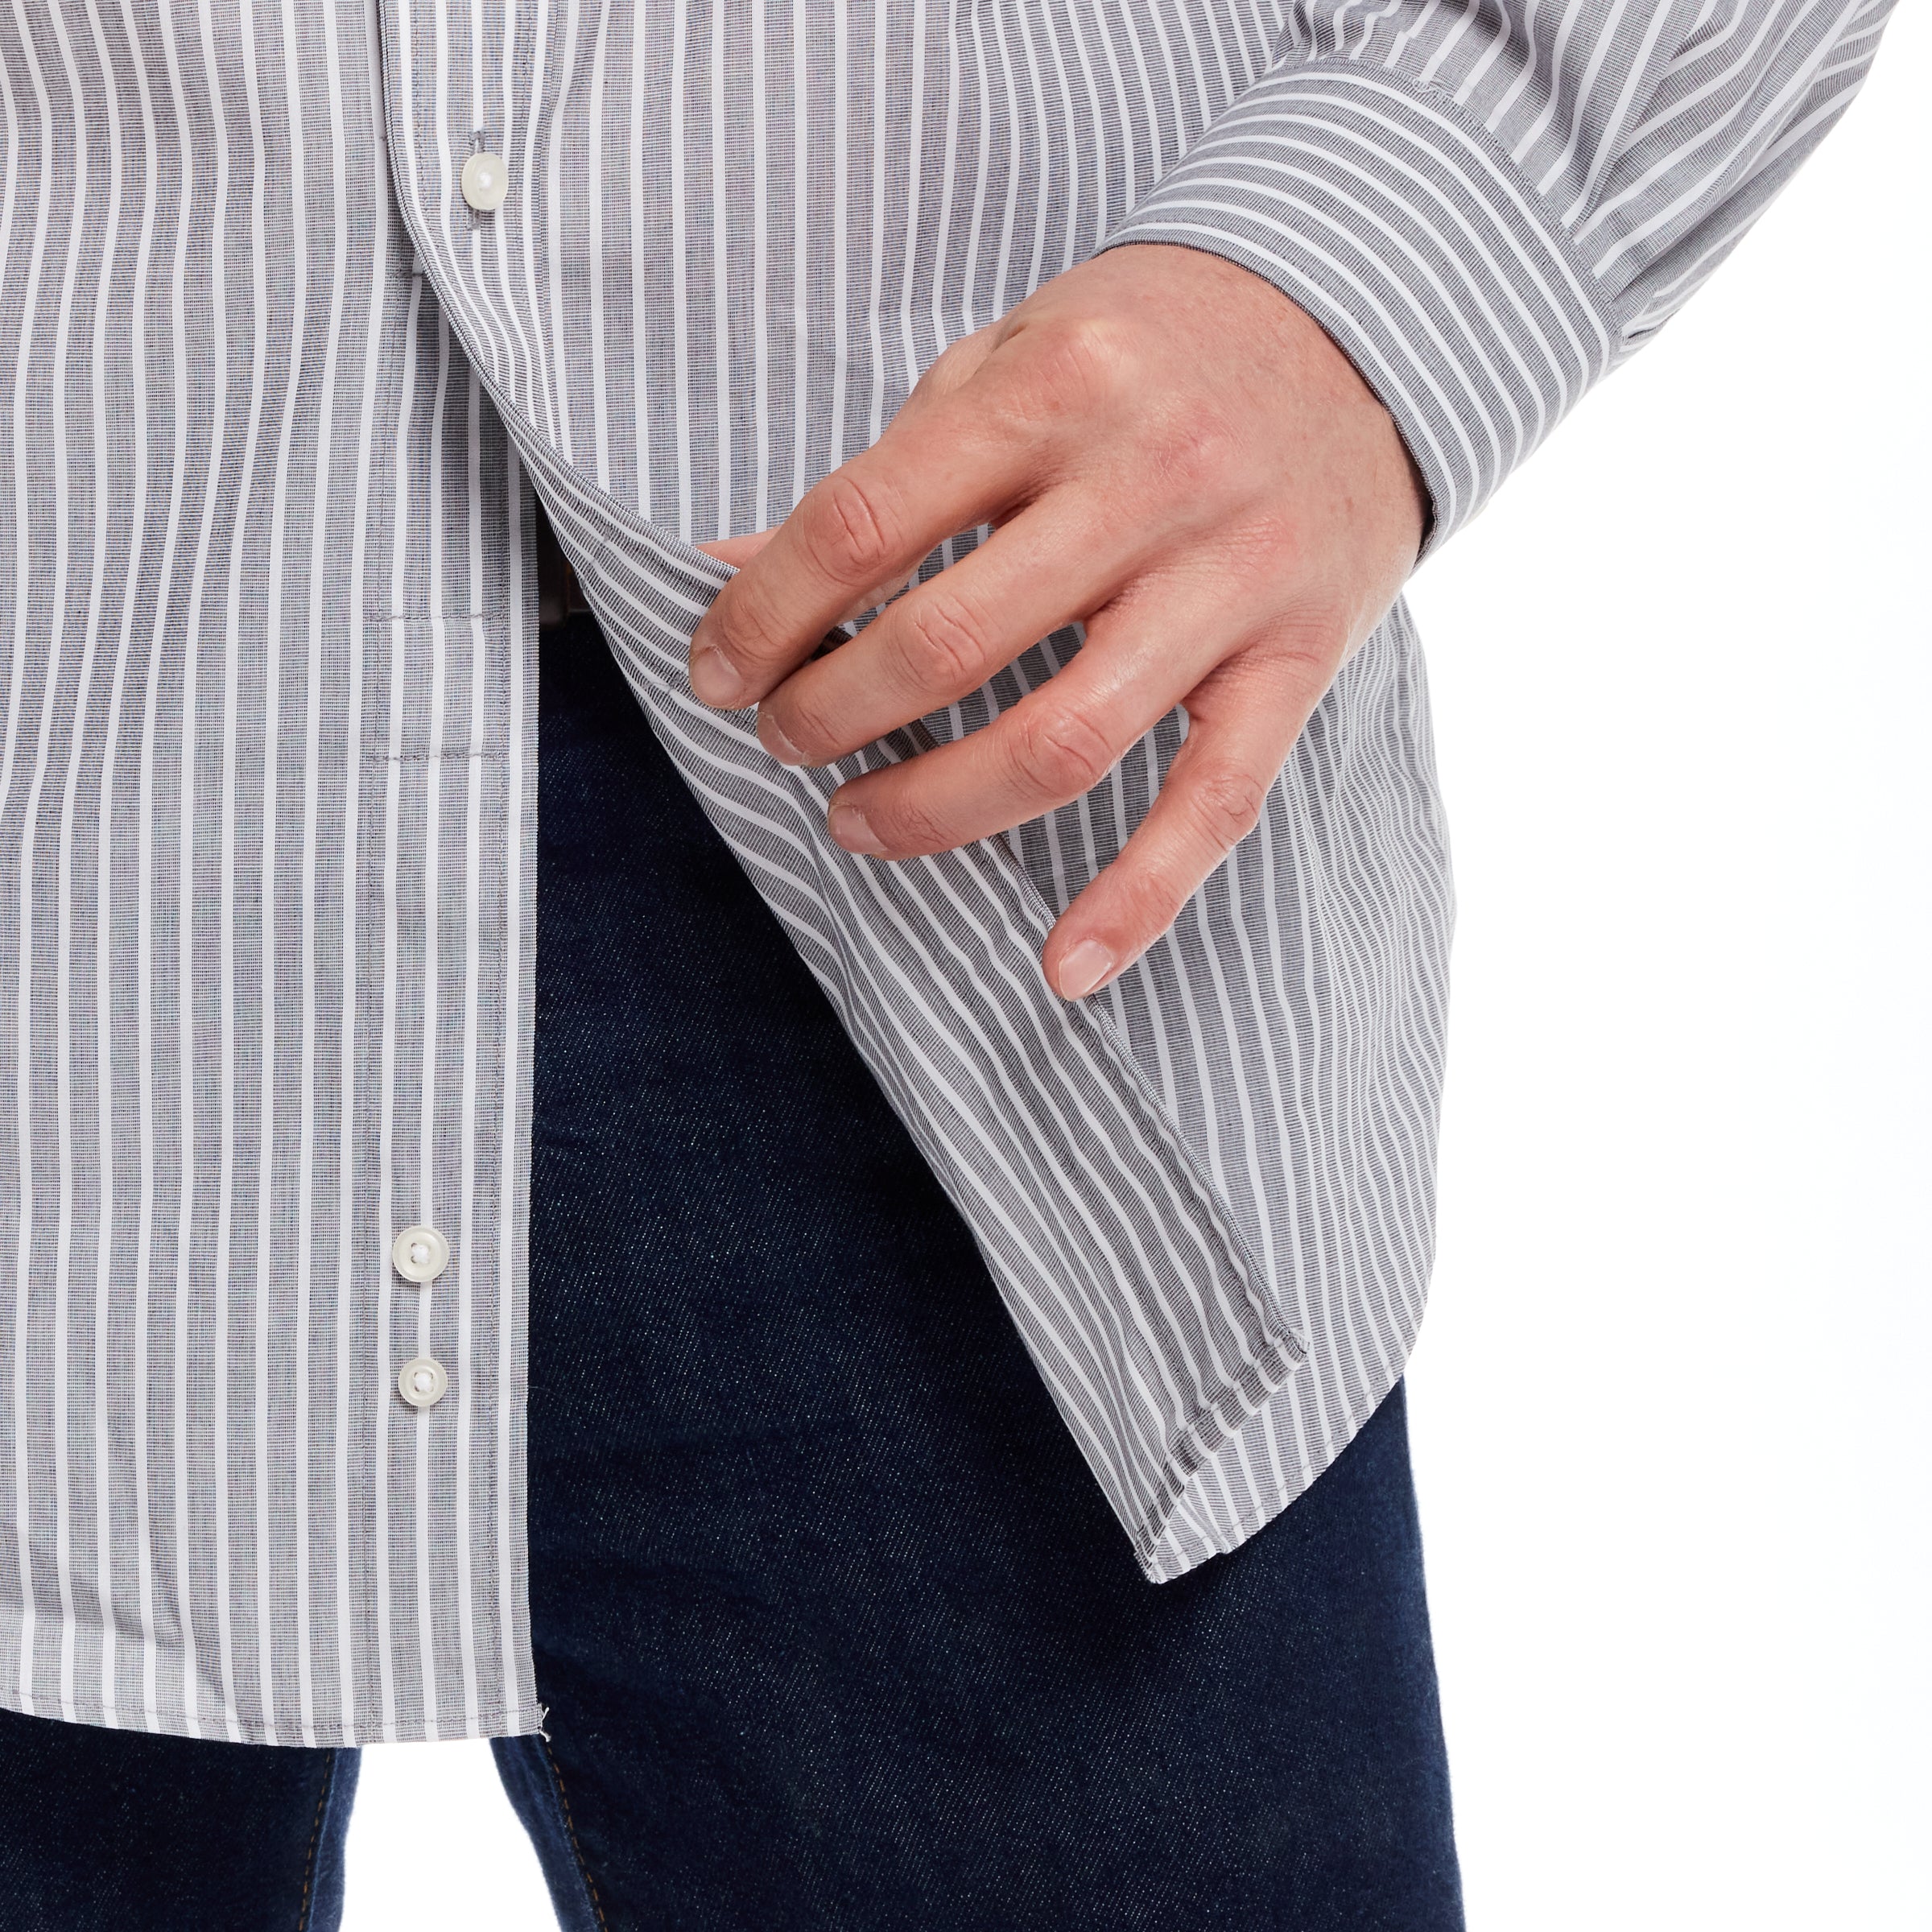 Classic Gray and White Stripe Long Sleeve Button Down Collar Shirt with Magnetic Closures